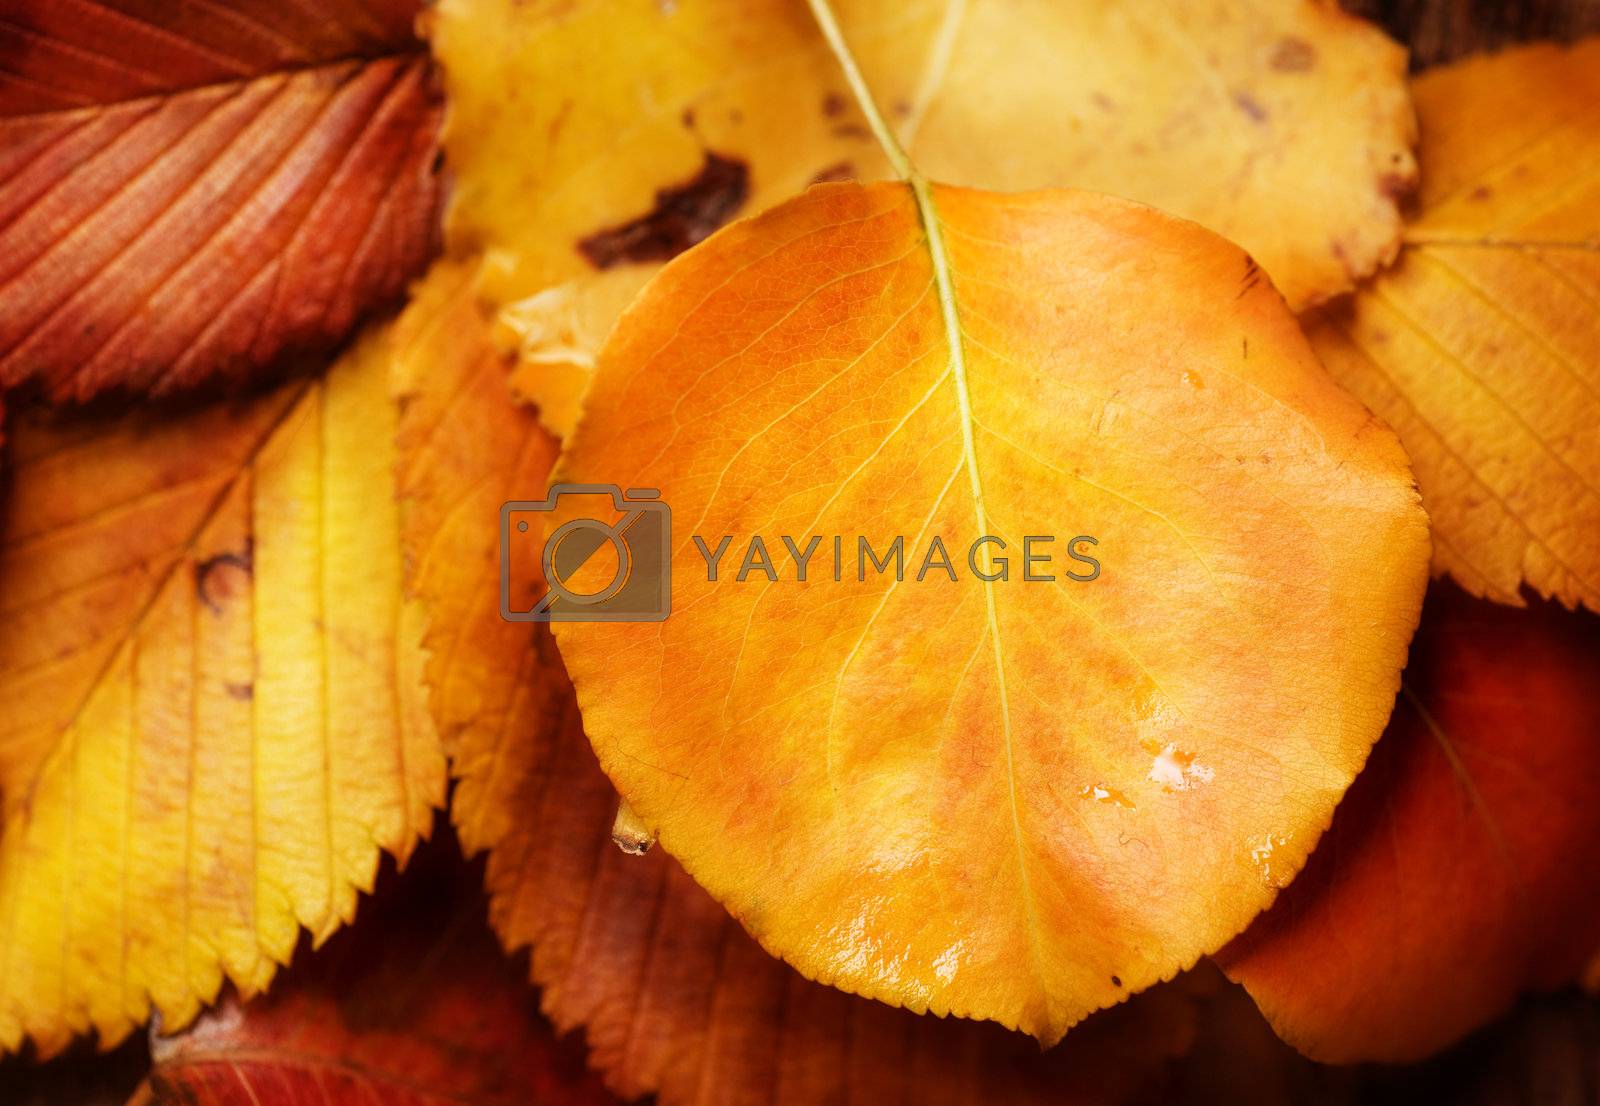 Royalty free image of Autumn Leaves by SubbotinaA